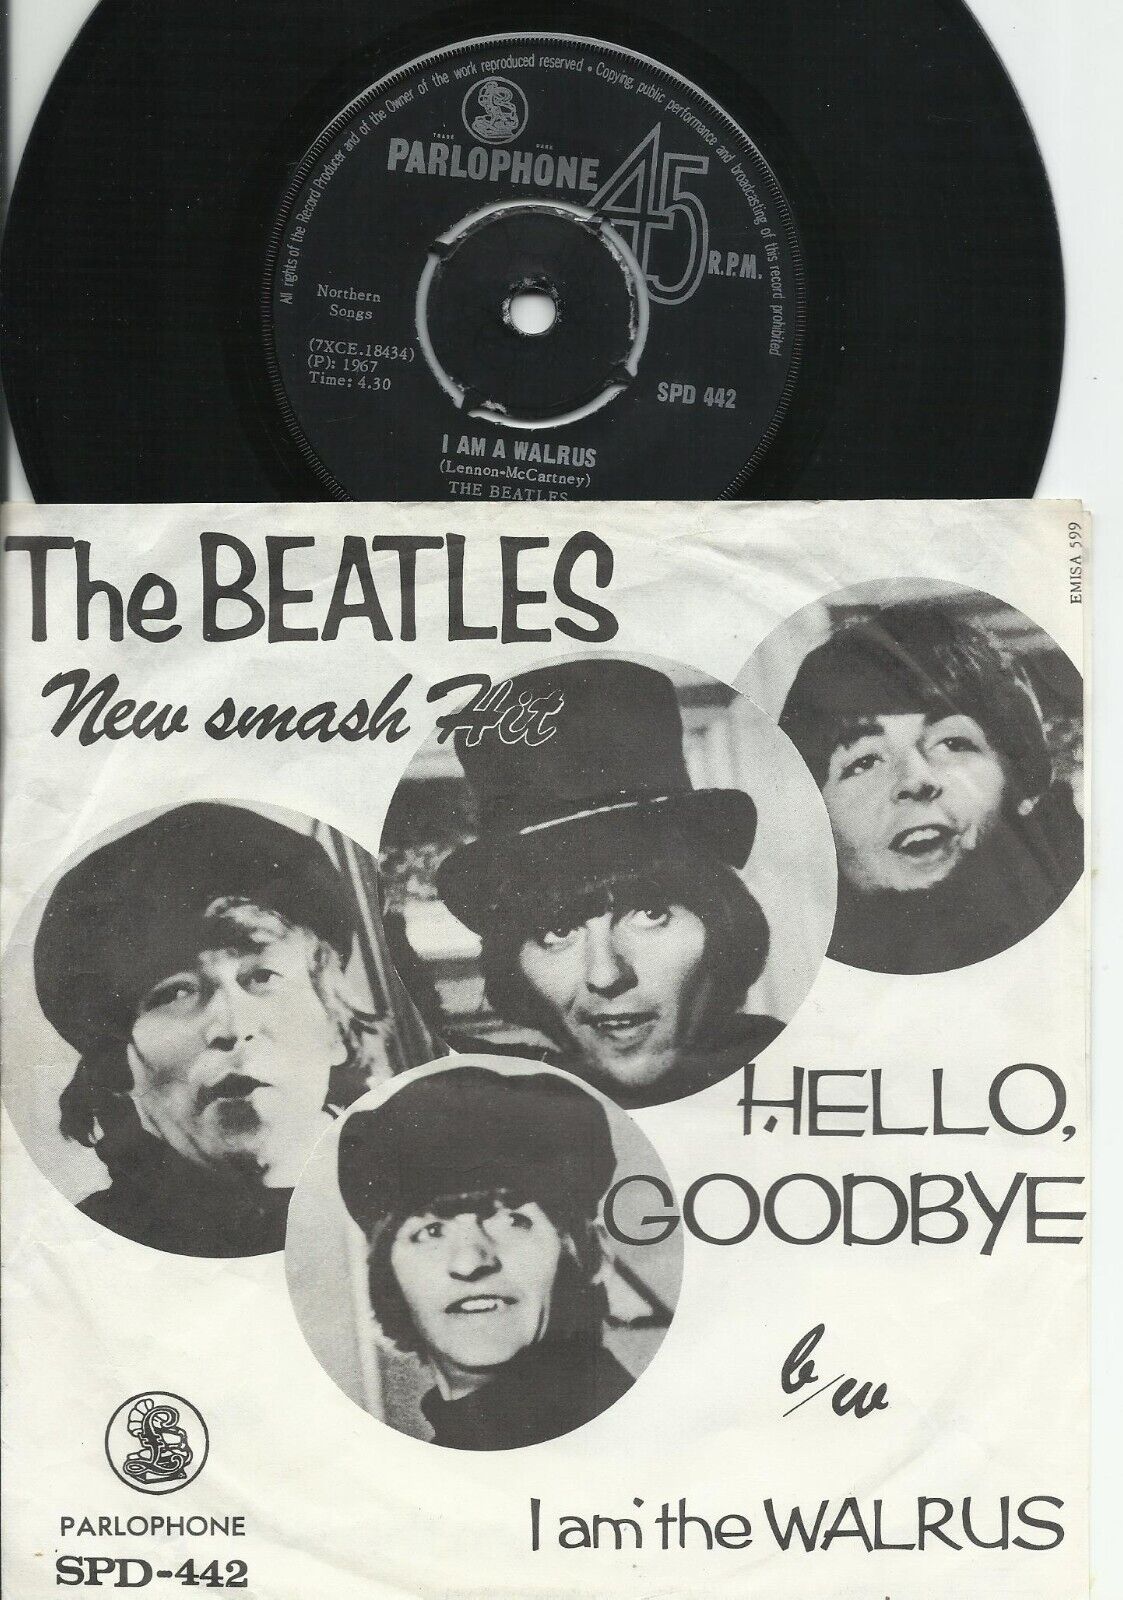 THE BEATLES  SOUTH  AFRICA  PS   45  I AM A WALRUS / HELLO, GOODBYE